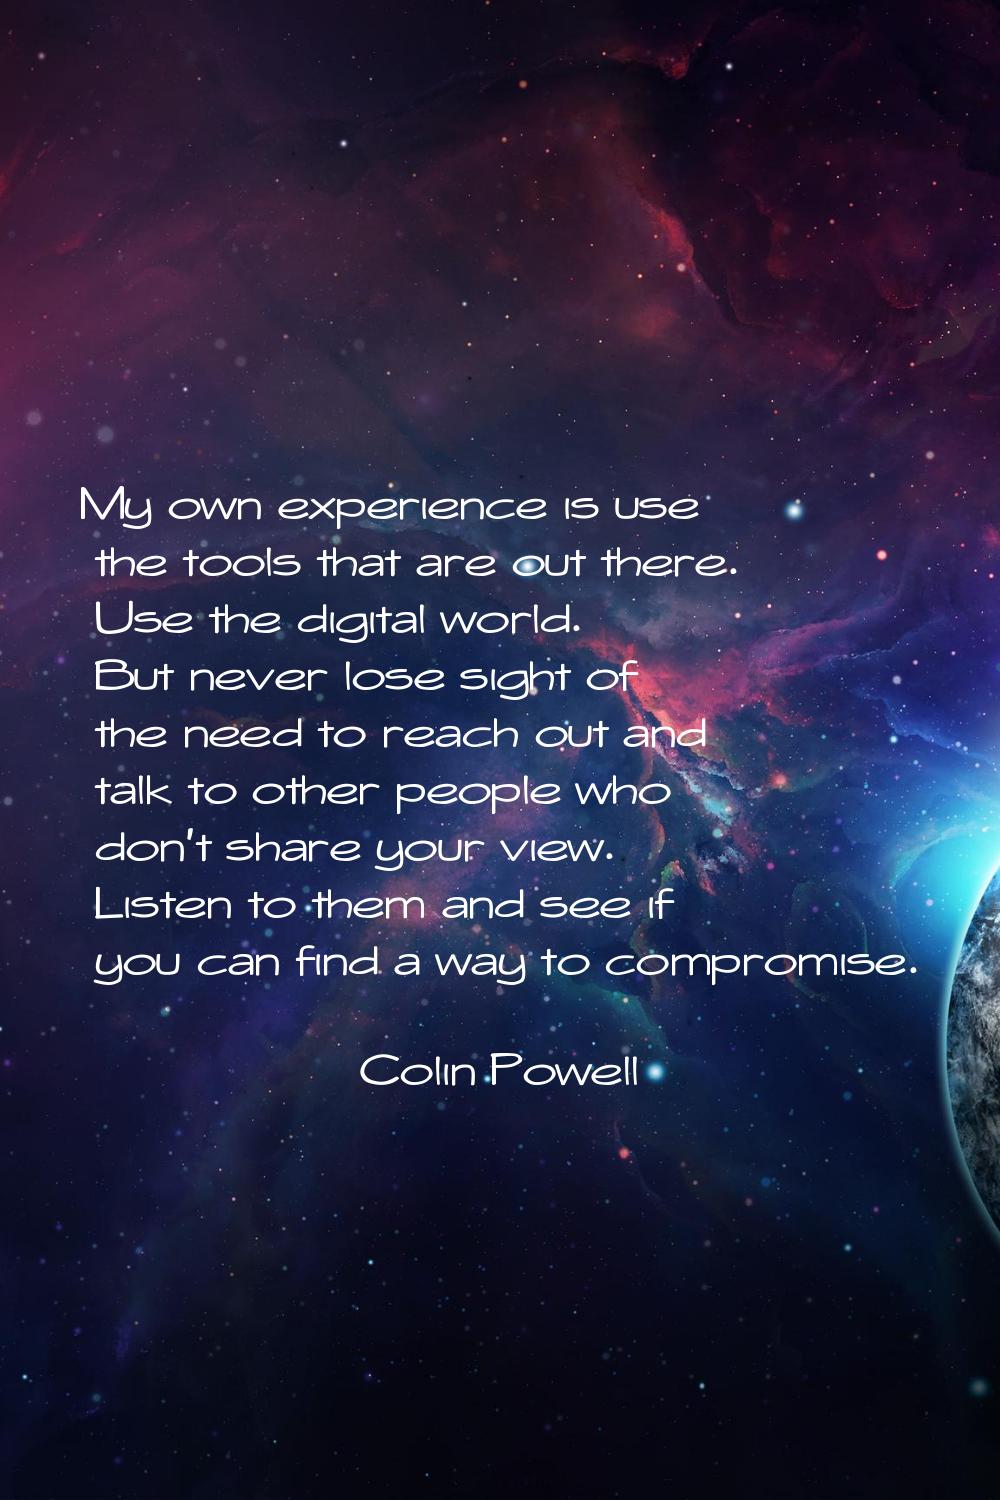 My own experience is use the tools that are out there. Use the digital world. But never lose sight 